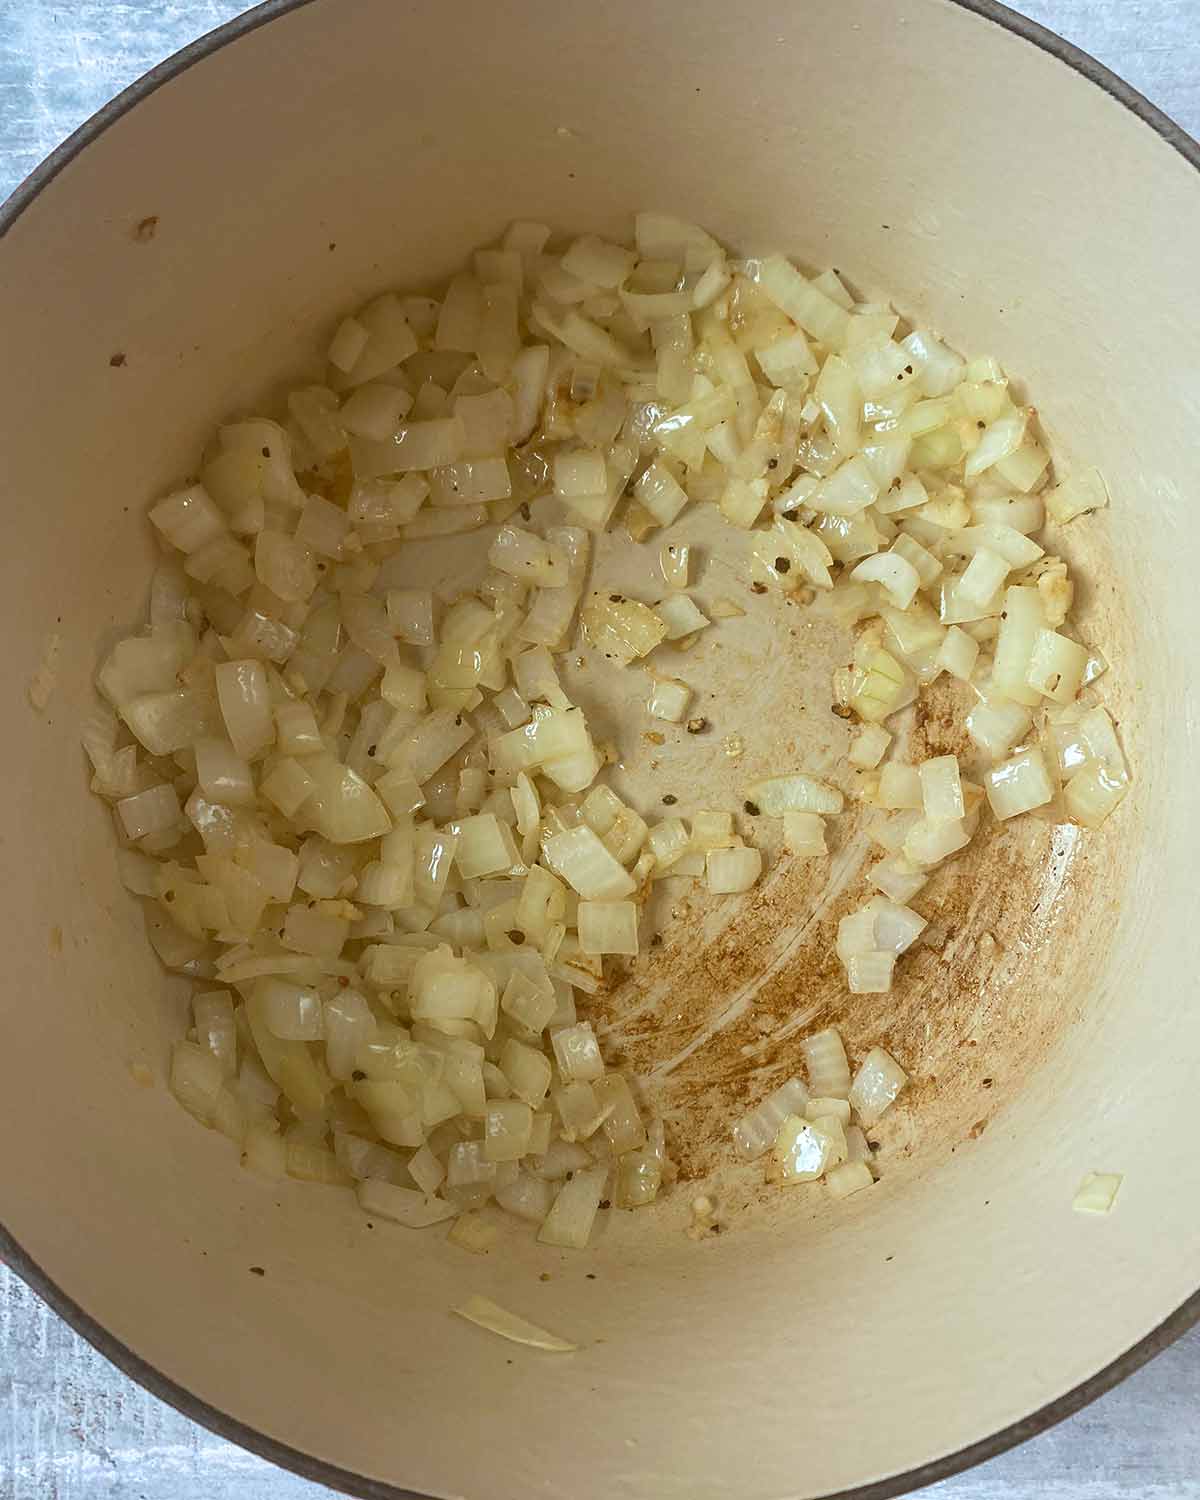 A large cooking pot with chopped onions cooking in it.